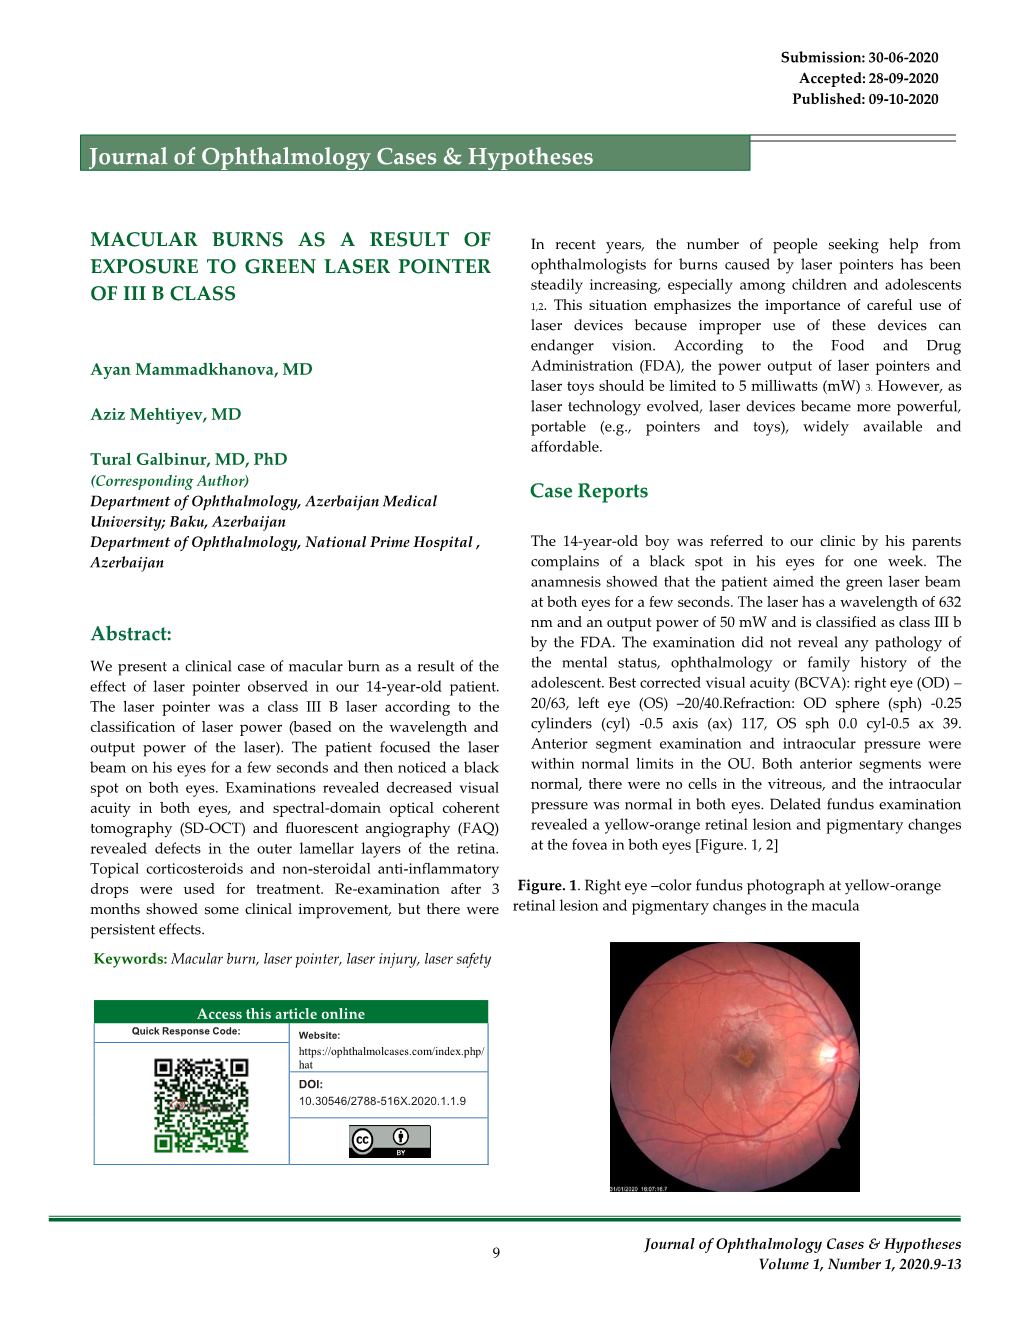 Macular Burns As a Result of Exposure to Green Laser Pointer of III B Class